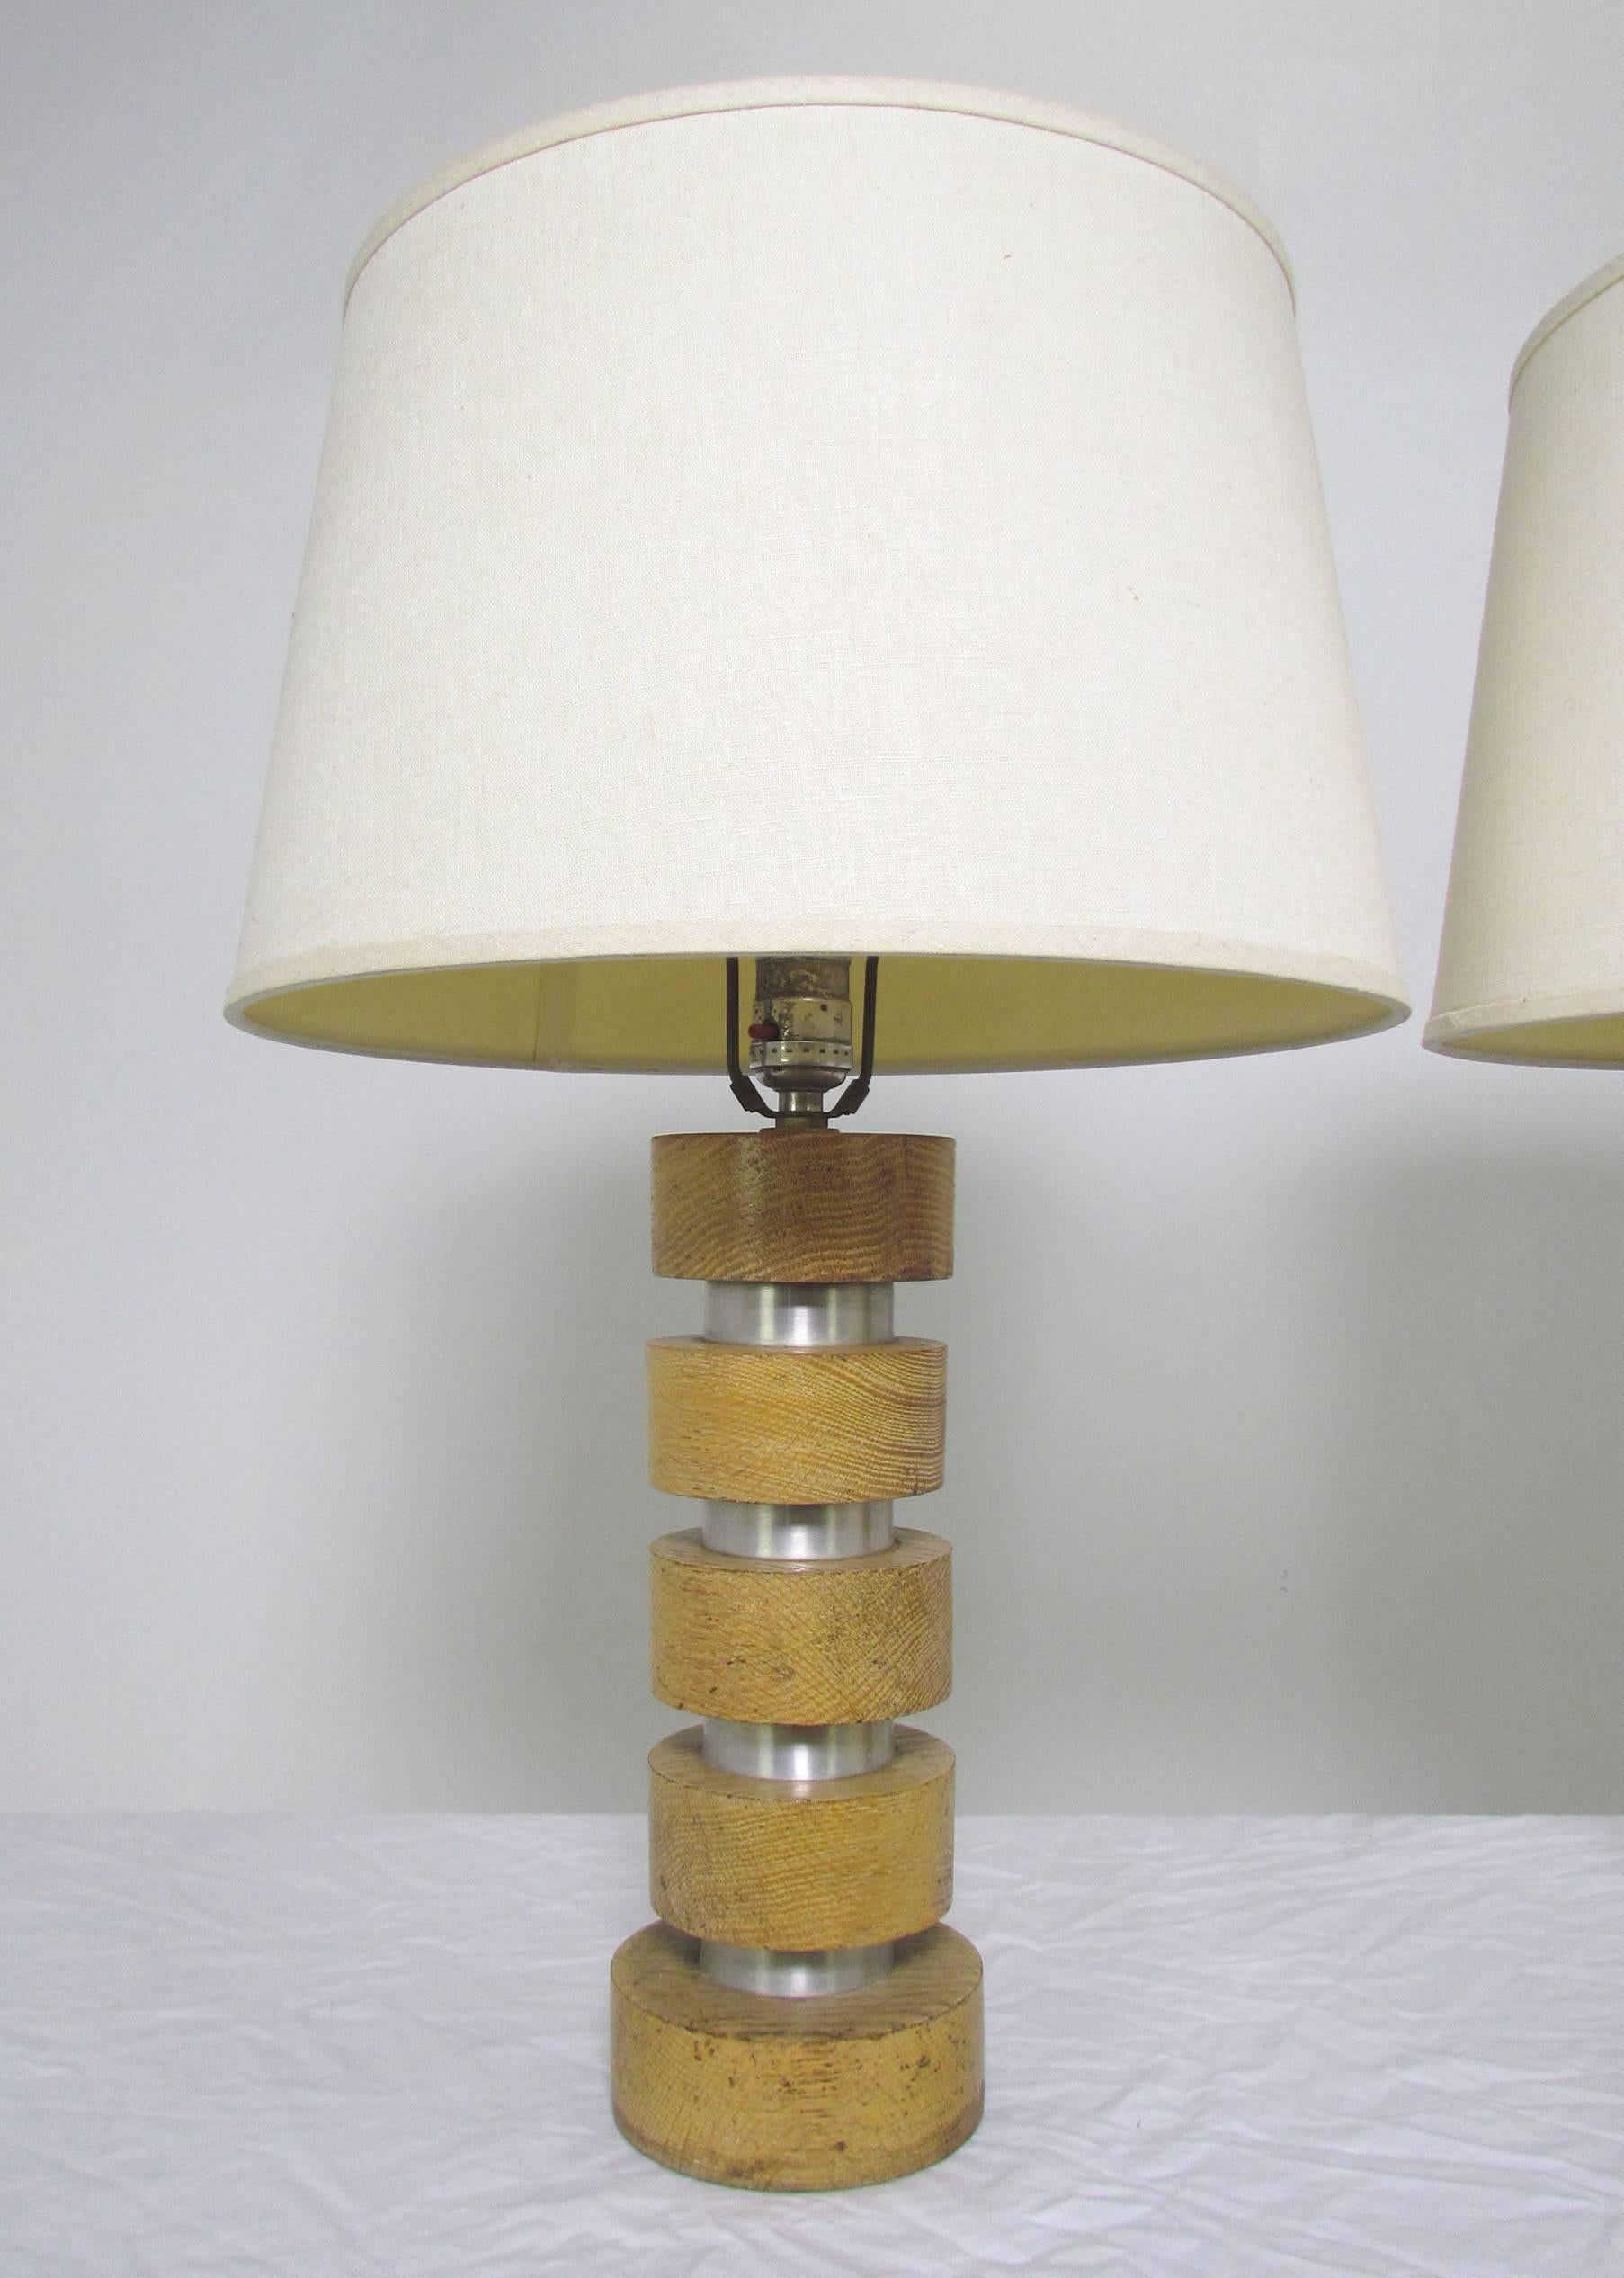 American Pair of Spun Aluminum and Maple Table Lamps by Russel Wright